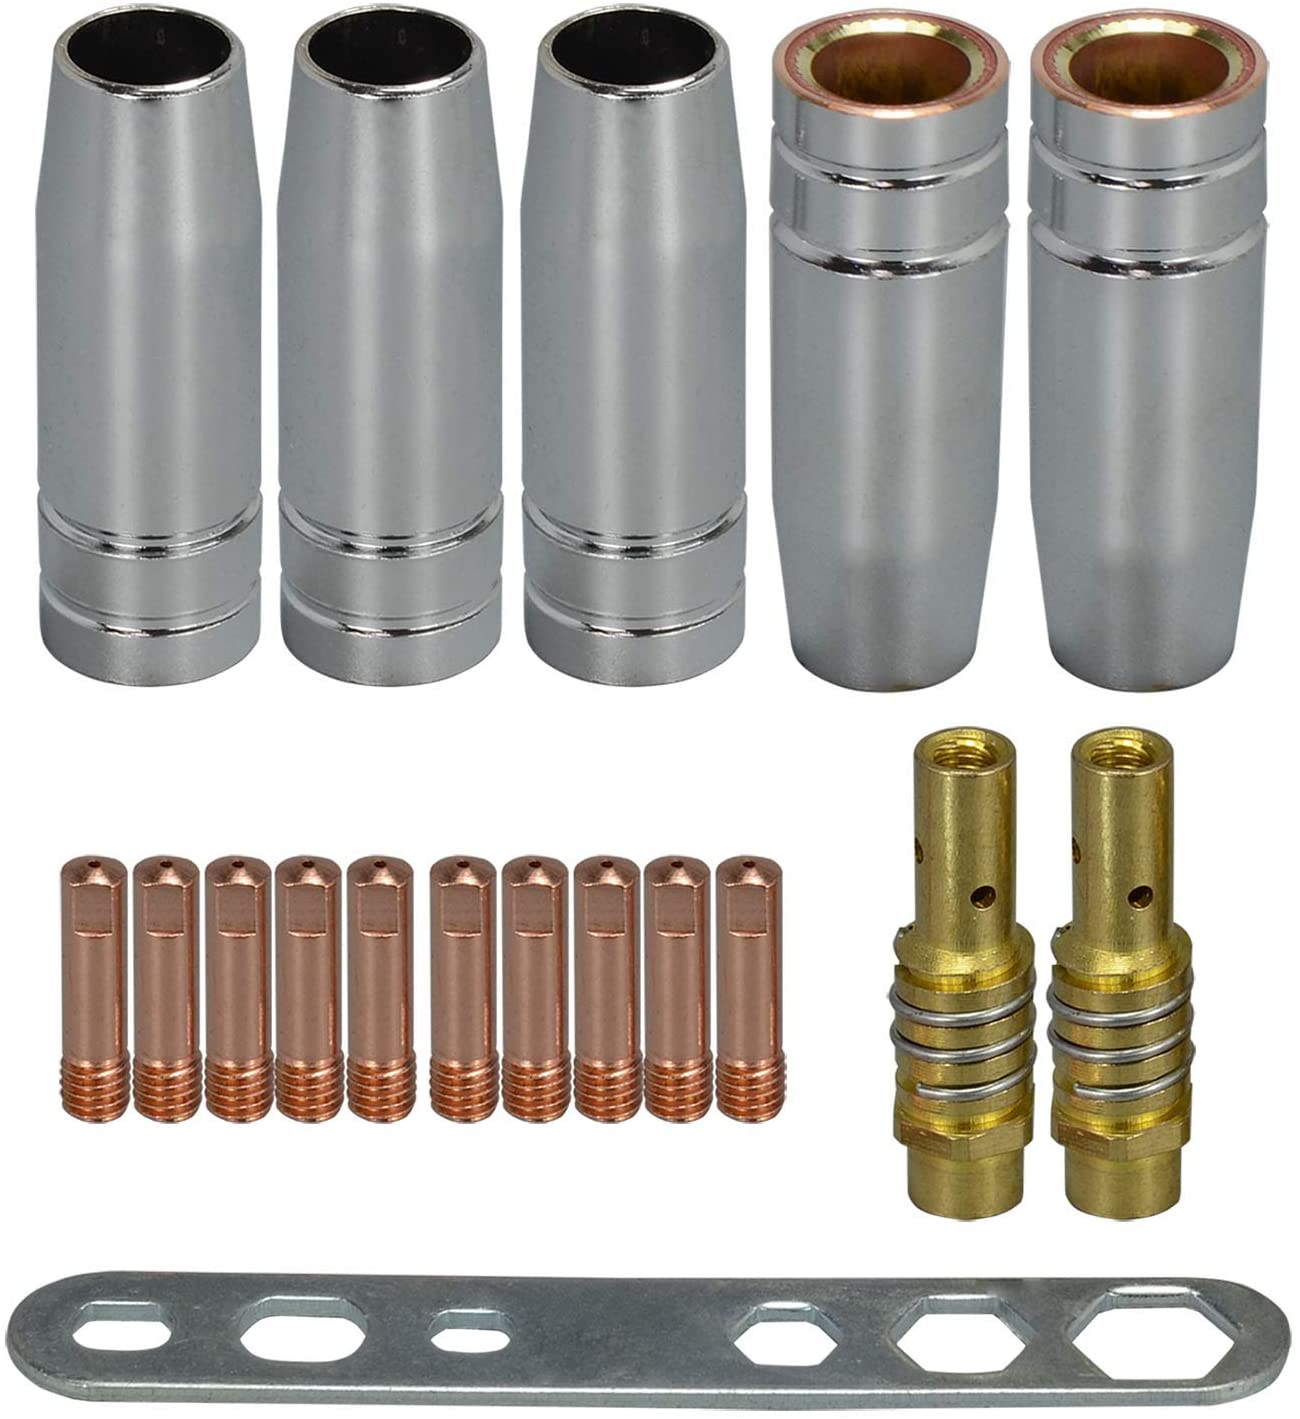 MB15 15AK Contact Tip 0.8mm M6 & Tips Holder Difuser & Shield Cup For MB15 15AK MIG Welding Torch 18pk 